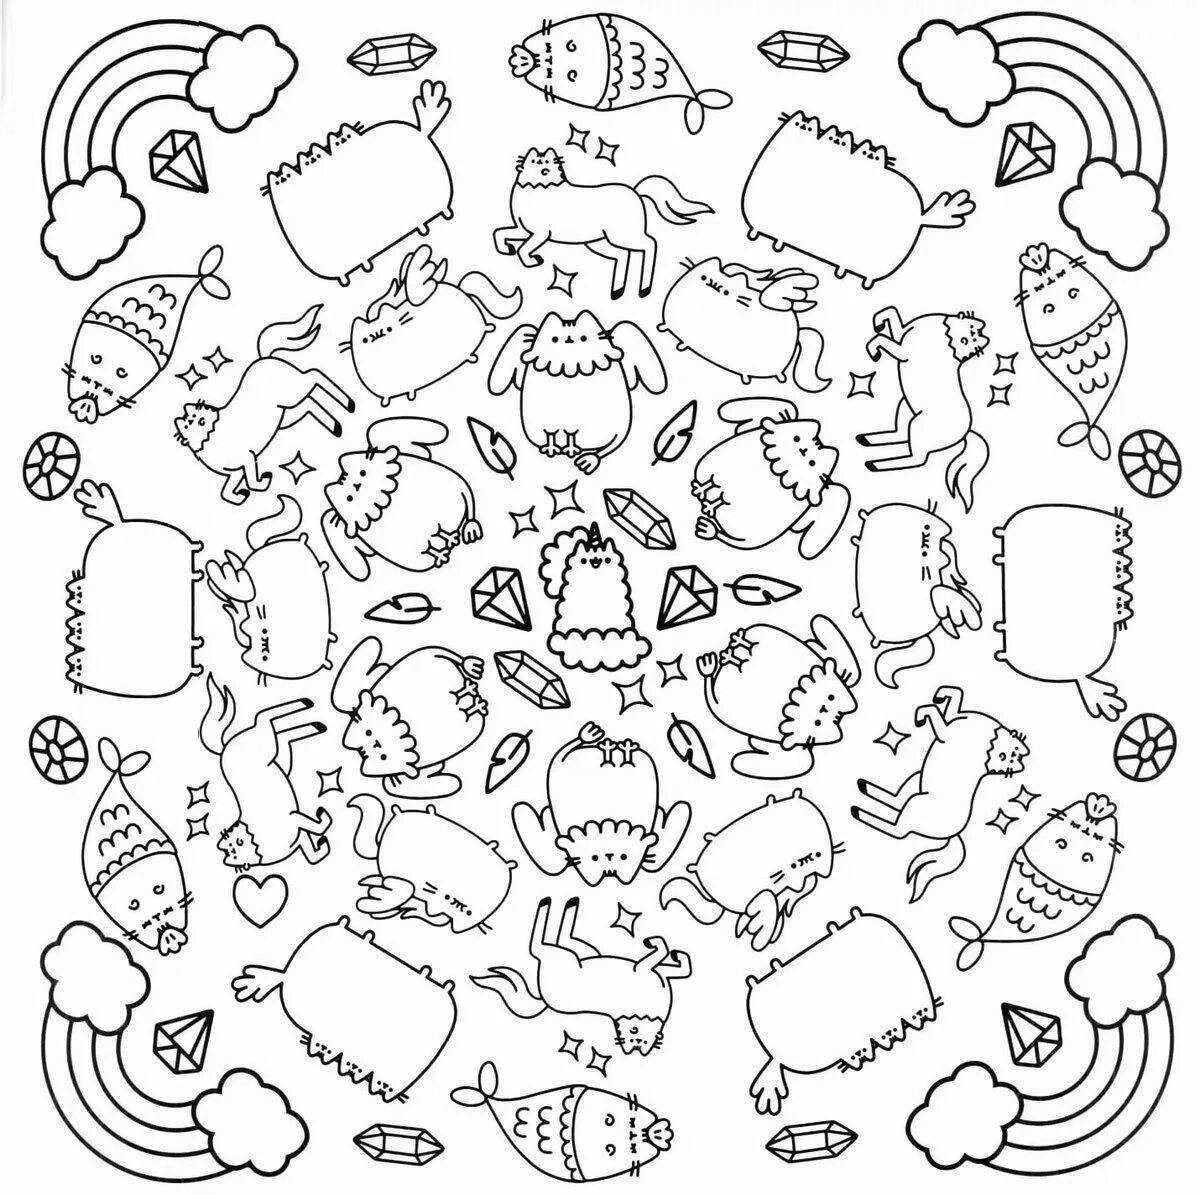 Radiant coloring page cute little ones для наклеек